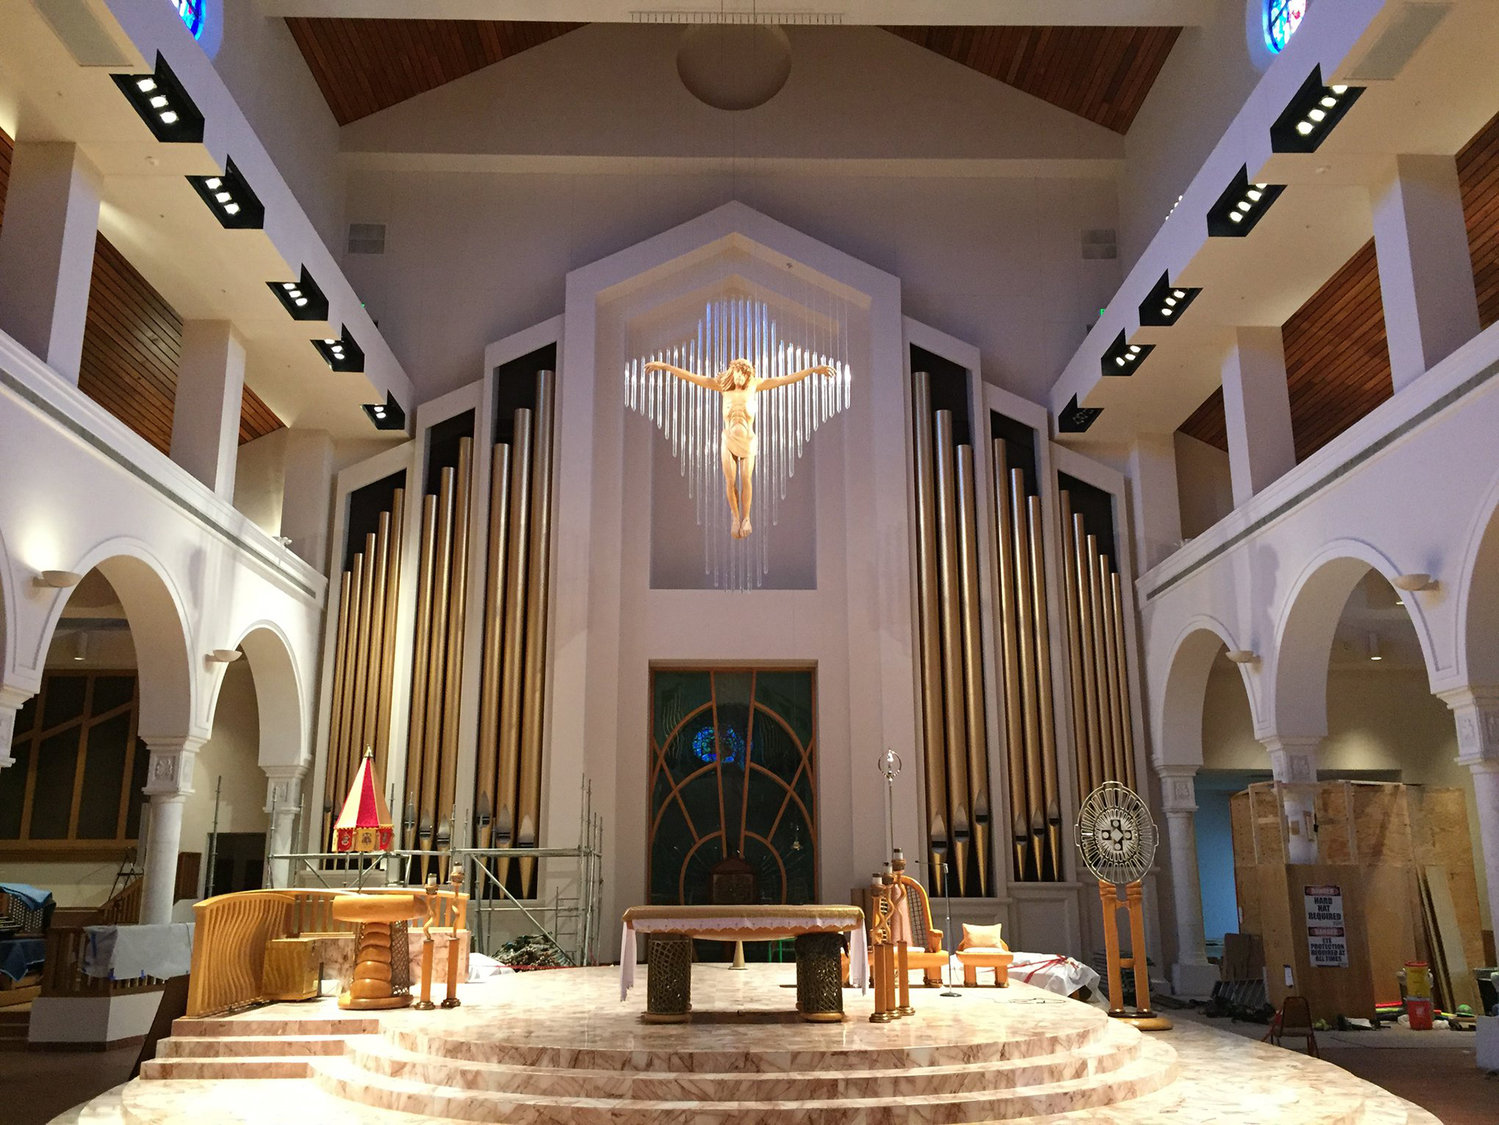 Organ pipes are seen in this undated photo near the altar at the Basilica of the National Shrine of Mary, Queen of the Universe in Orlando, Fla. The basilica recently completed the installation of 5,271 pipes, some reaching has high as 37 feet.